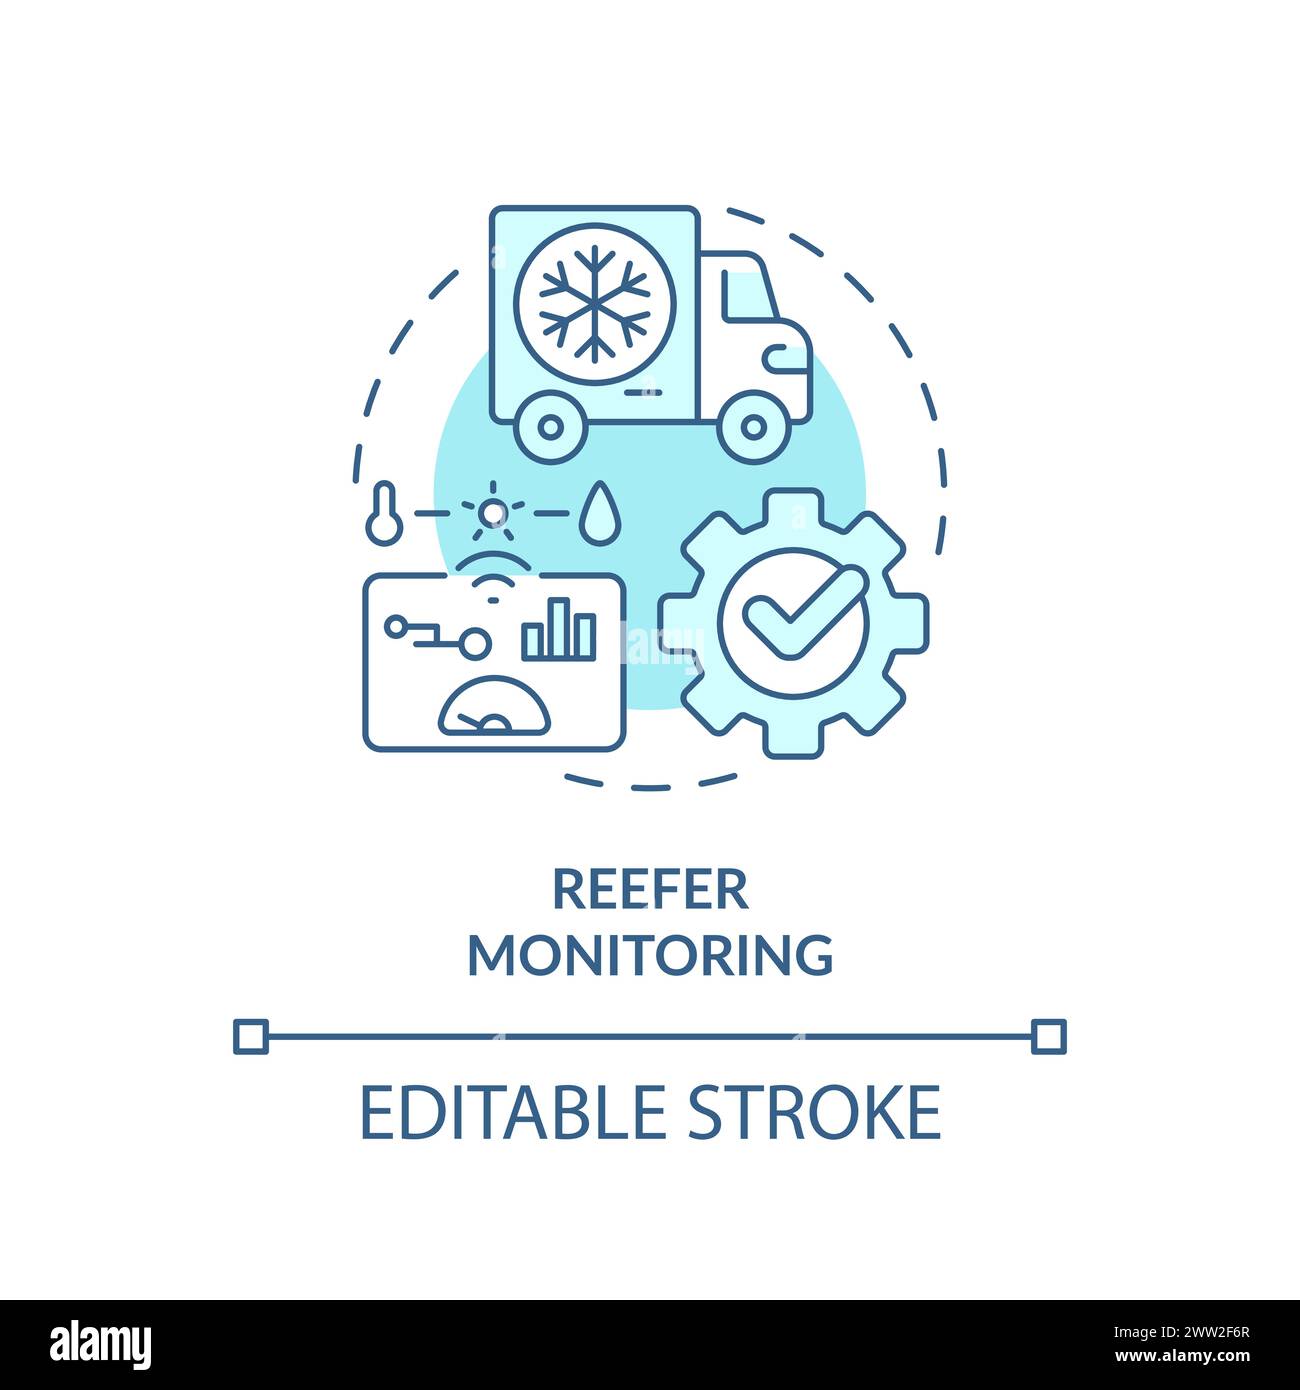 Reefer monitoring soft blue concept icon Stock Vector